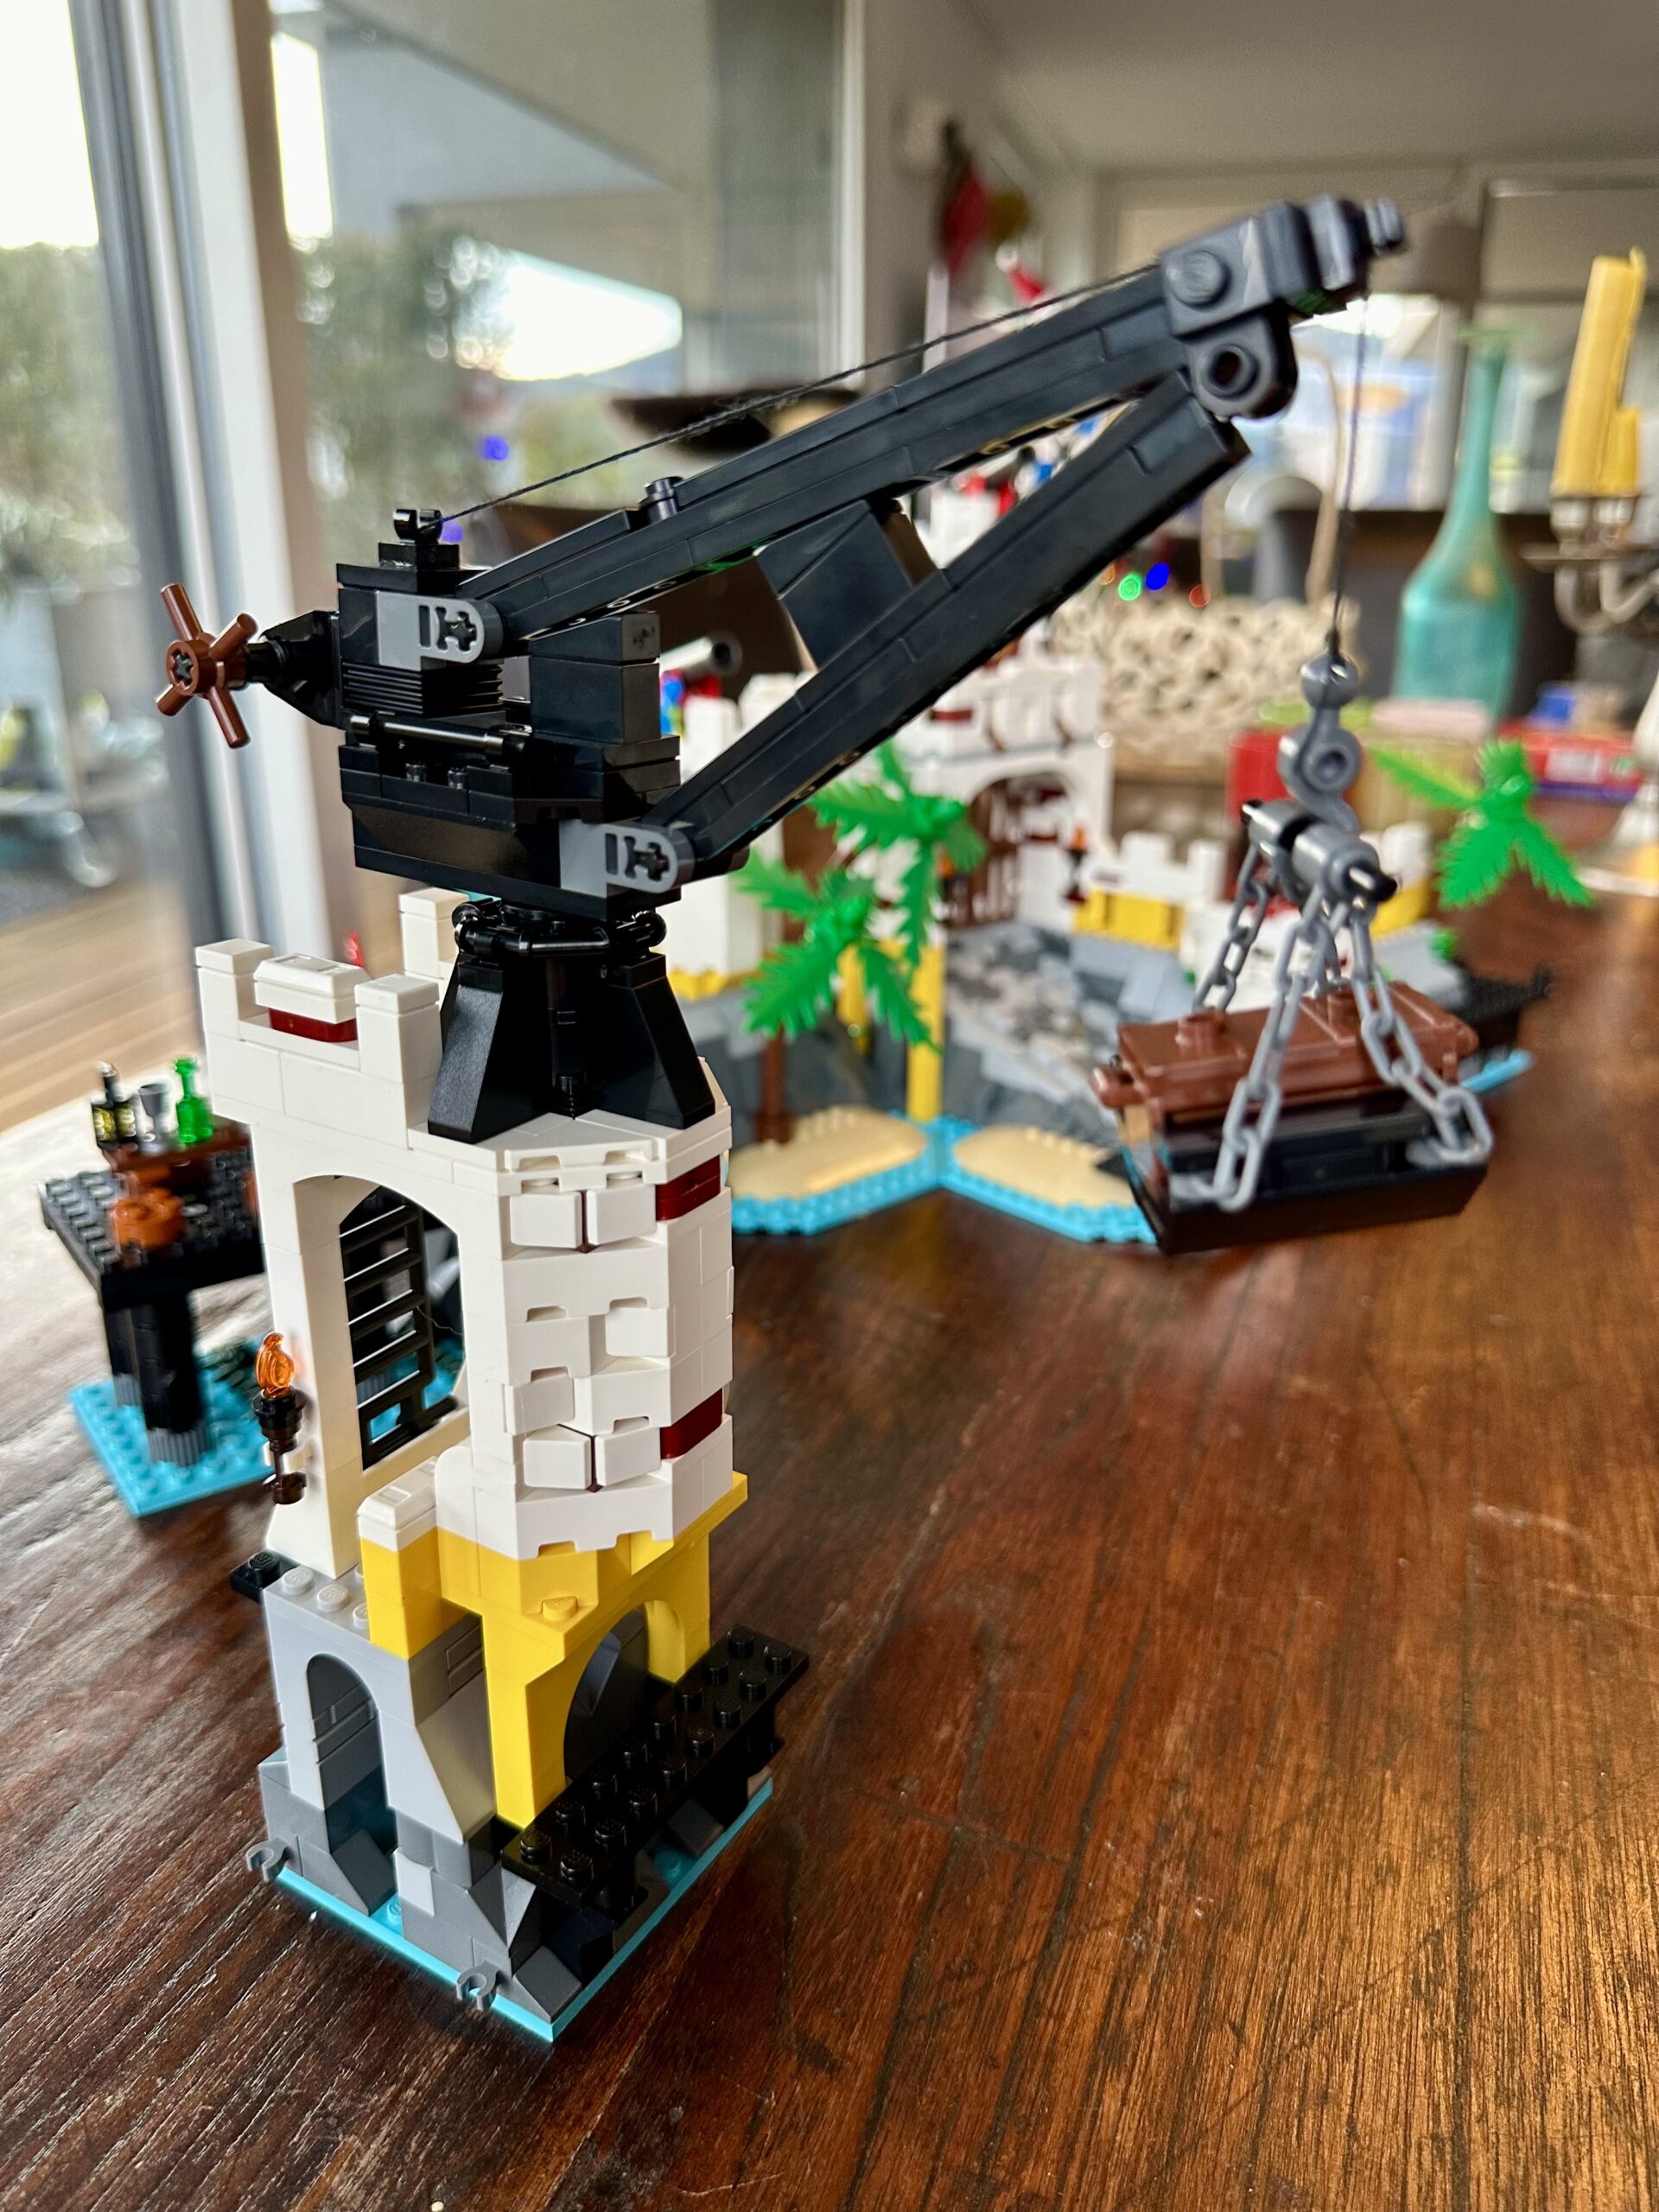 LEGO build of set 10320 Eldorado Fortress in progress. A small white and yellow tower with a black crane atop. The crane lifts a brown treasure chest.